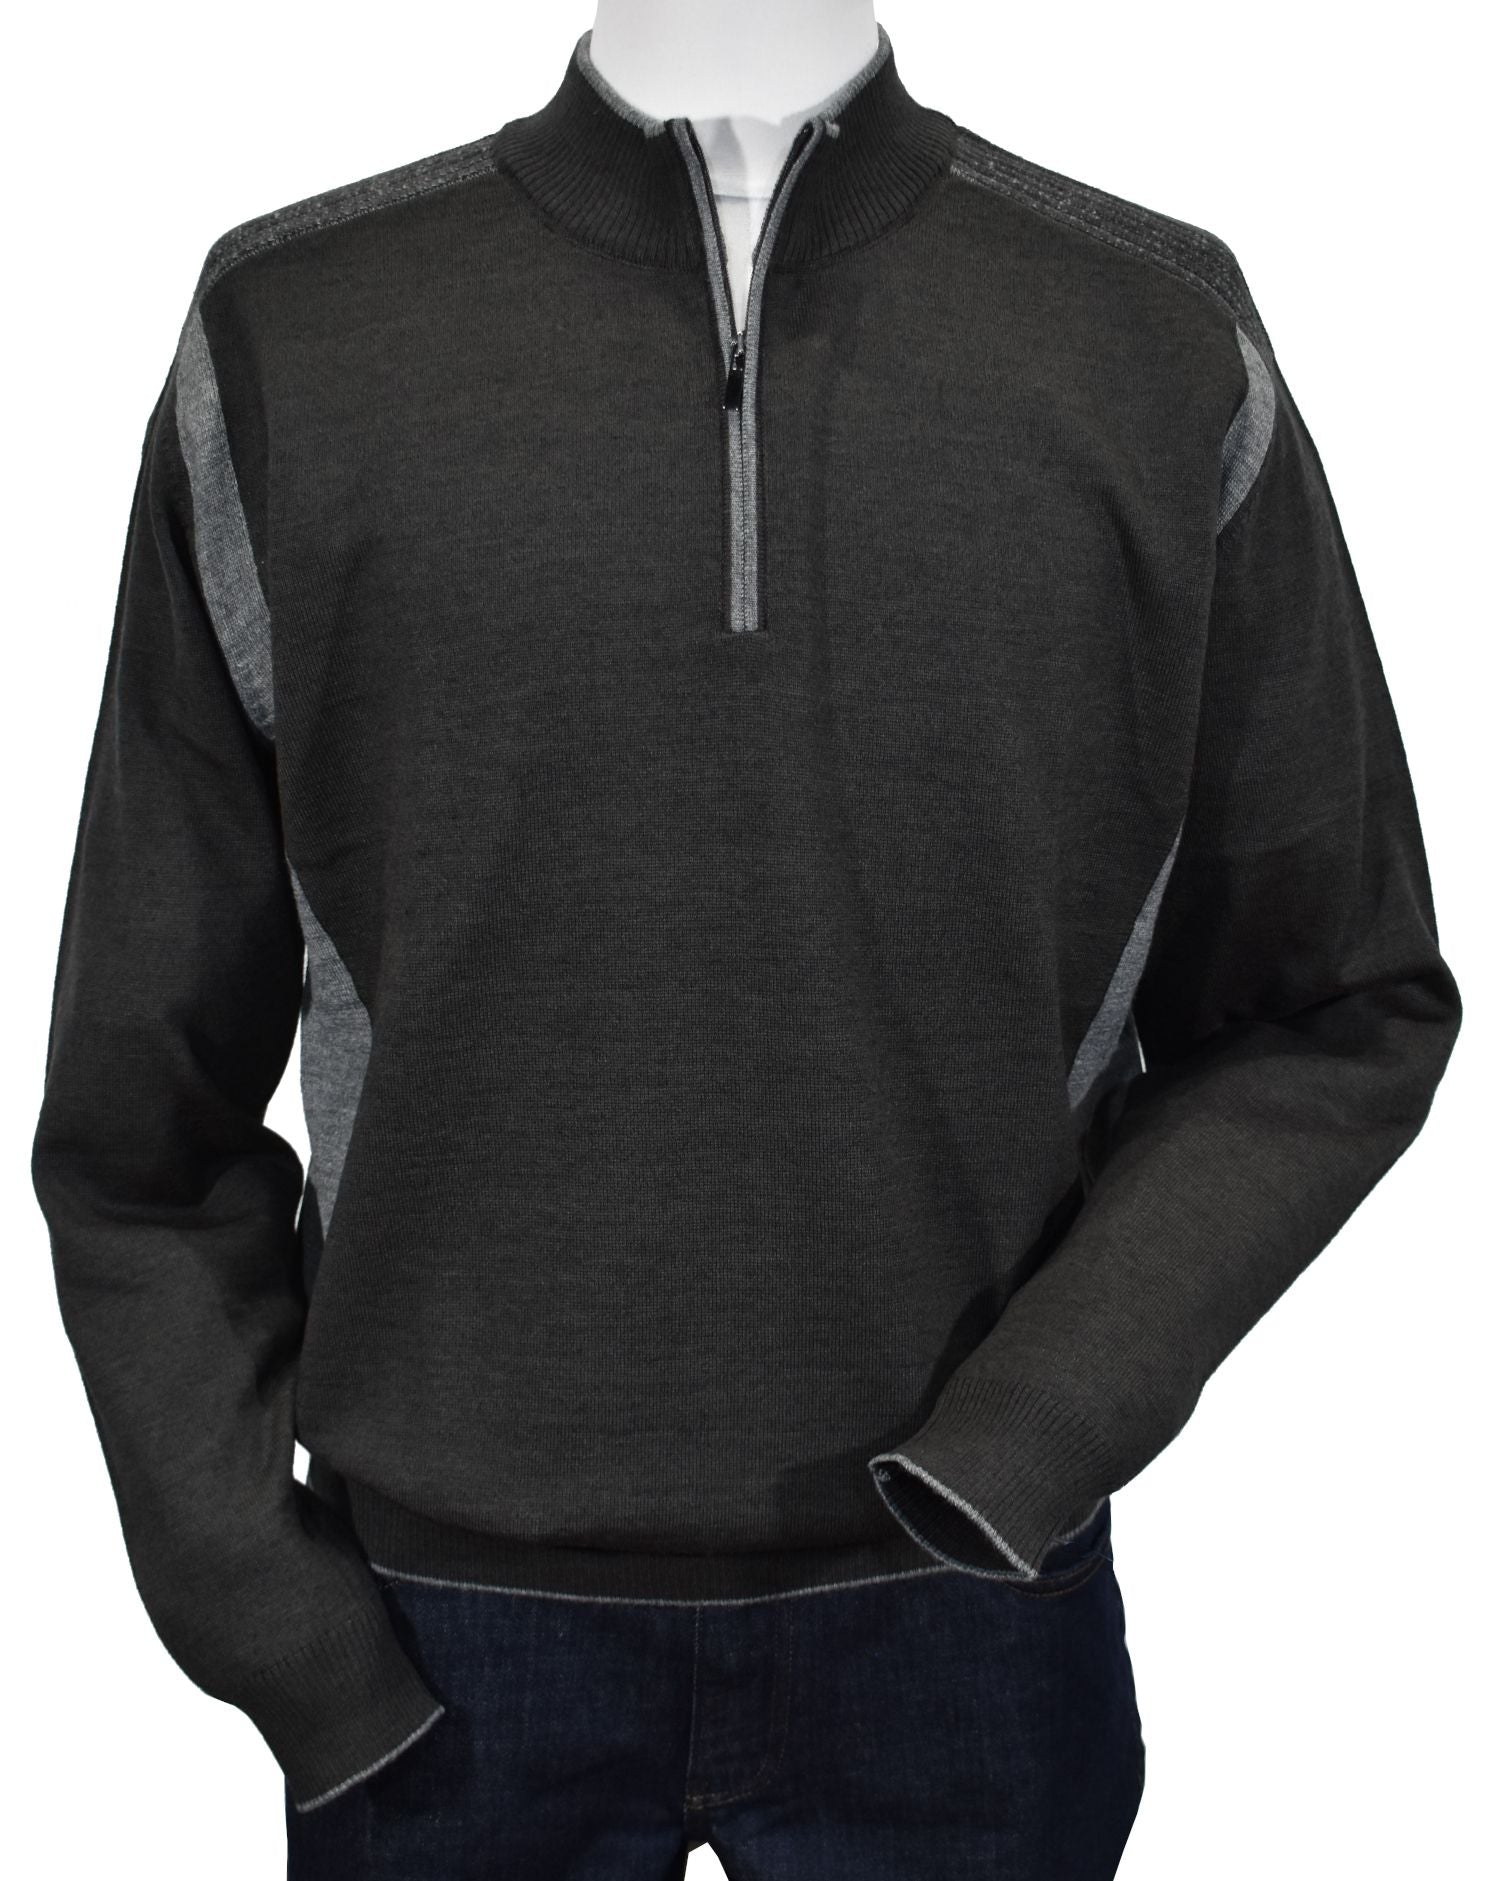 The 866 Brosnan Zip Mock is the epitome of stylish comfort. Crafted from an ultra-luxurious merino wool blend, this medium-weight classic-fit pullover puts a modern spin on traditional menswear with its contrast side panels and mixed shoulder detail. It's sure to make any active gent look smart and sophisticated.